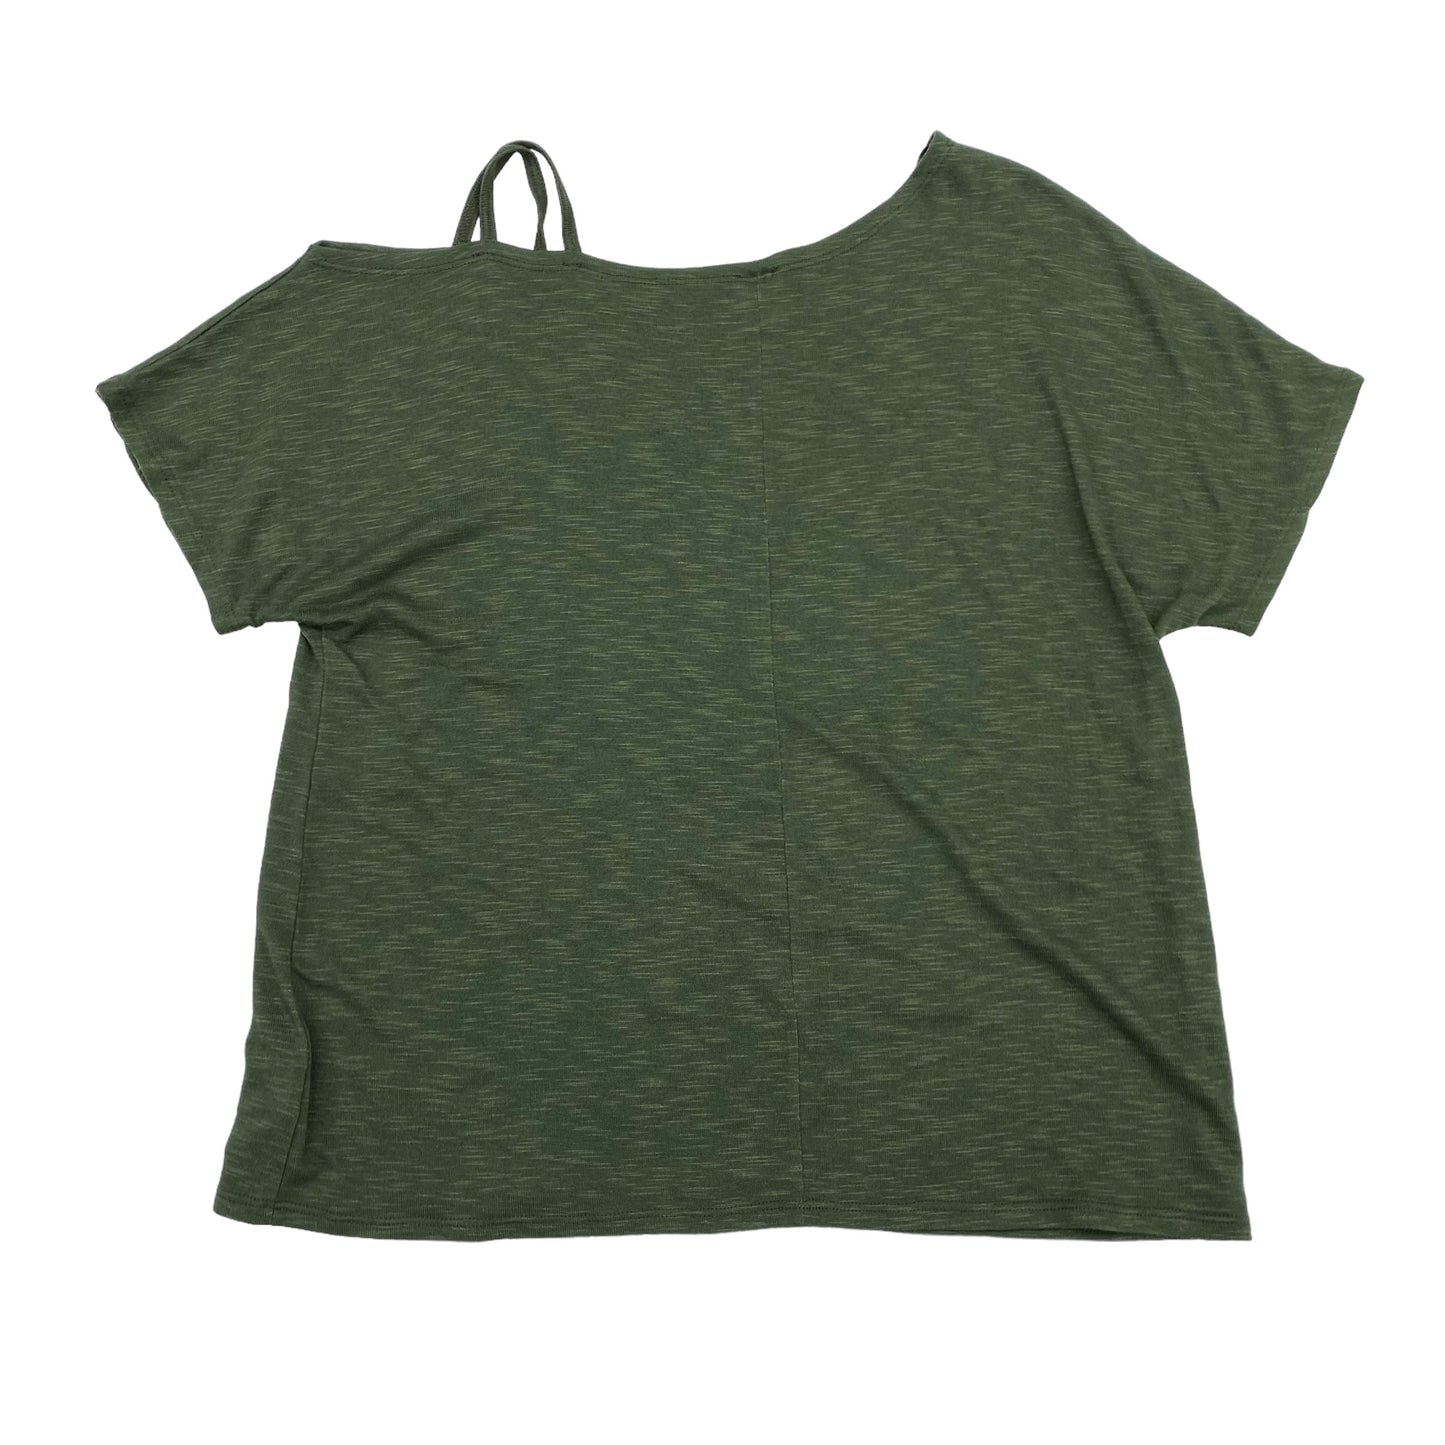 GREEN TOP SS by KALEIGH Size:1X